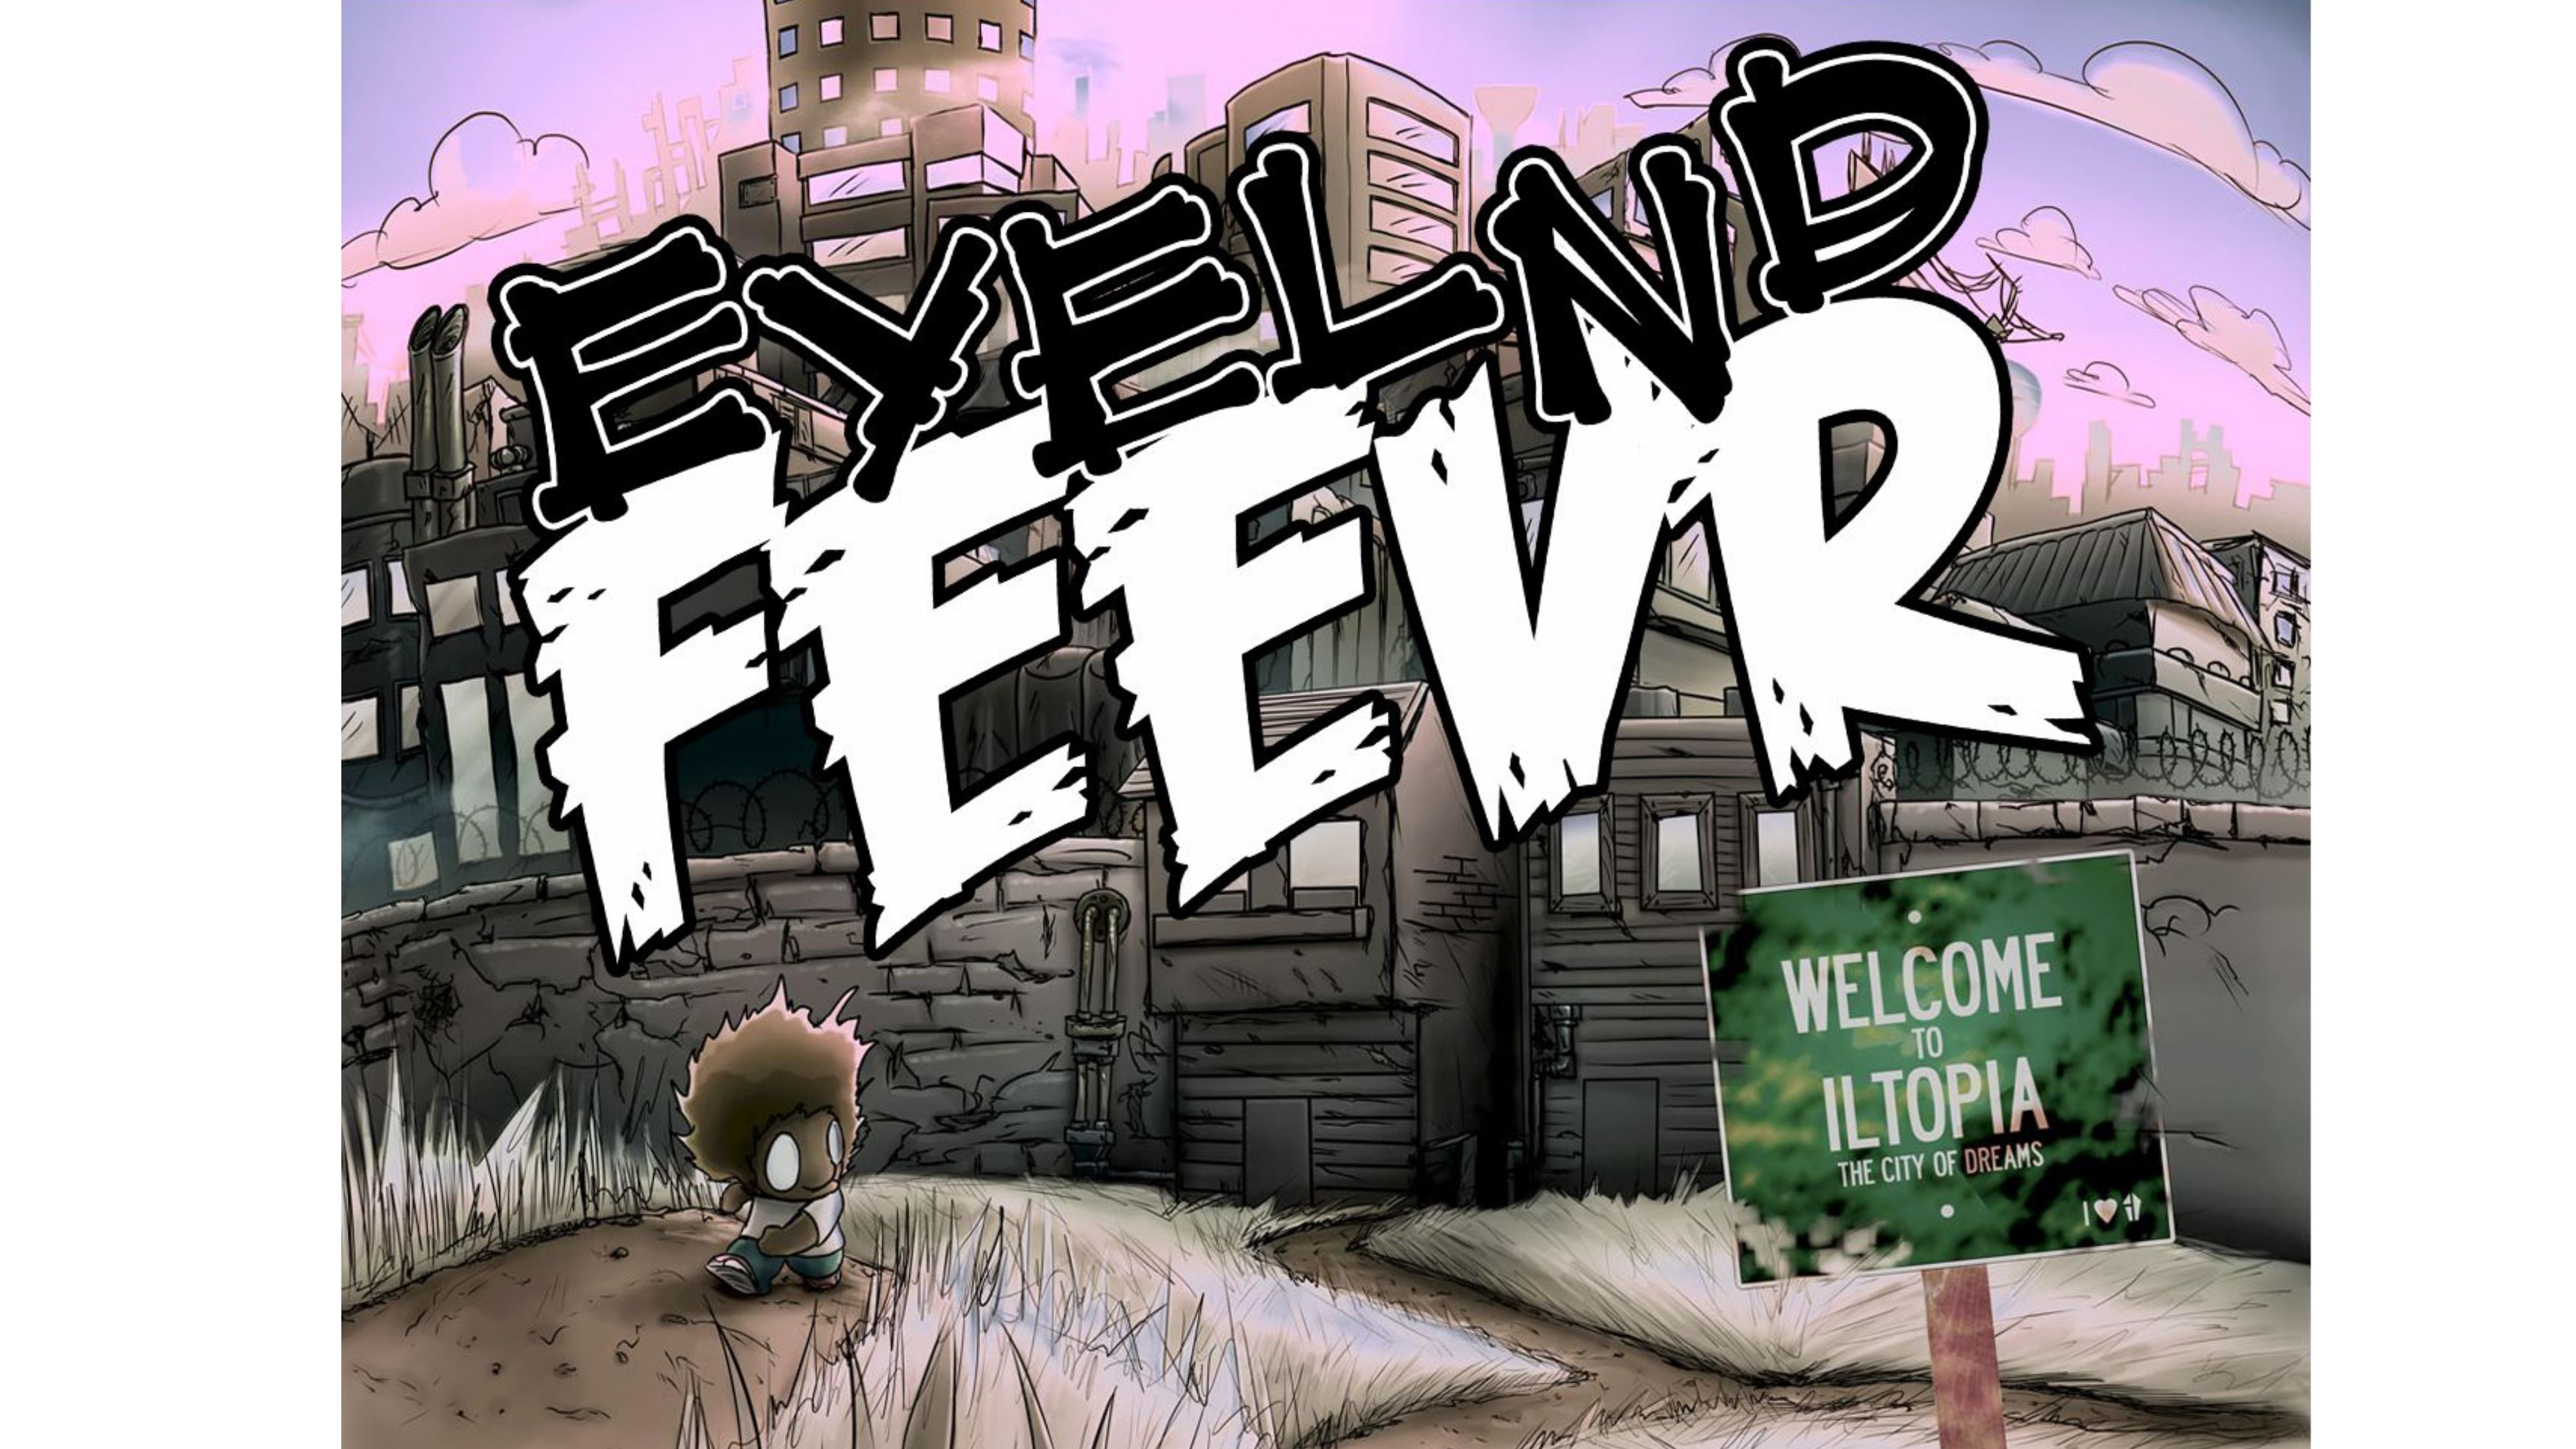 Eyeland fever cover photo with a dystopian background and graffiti title.